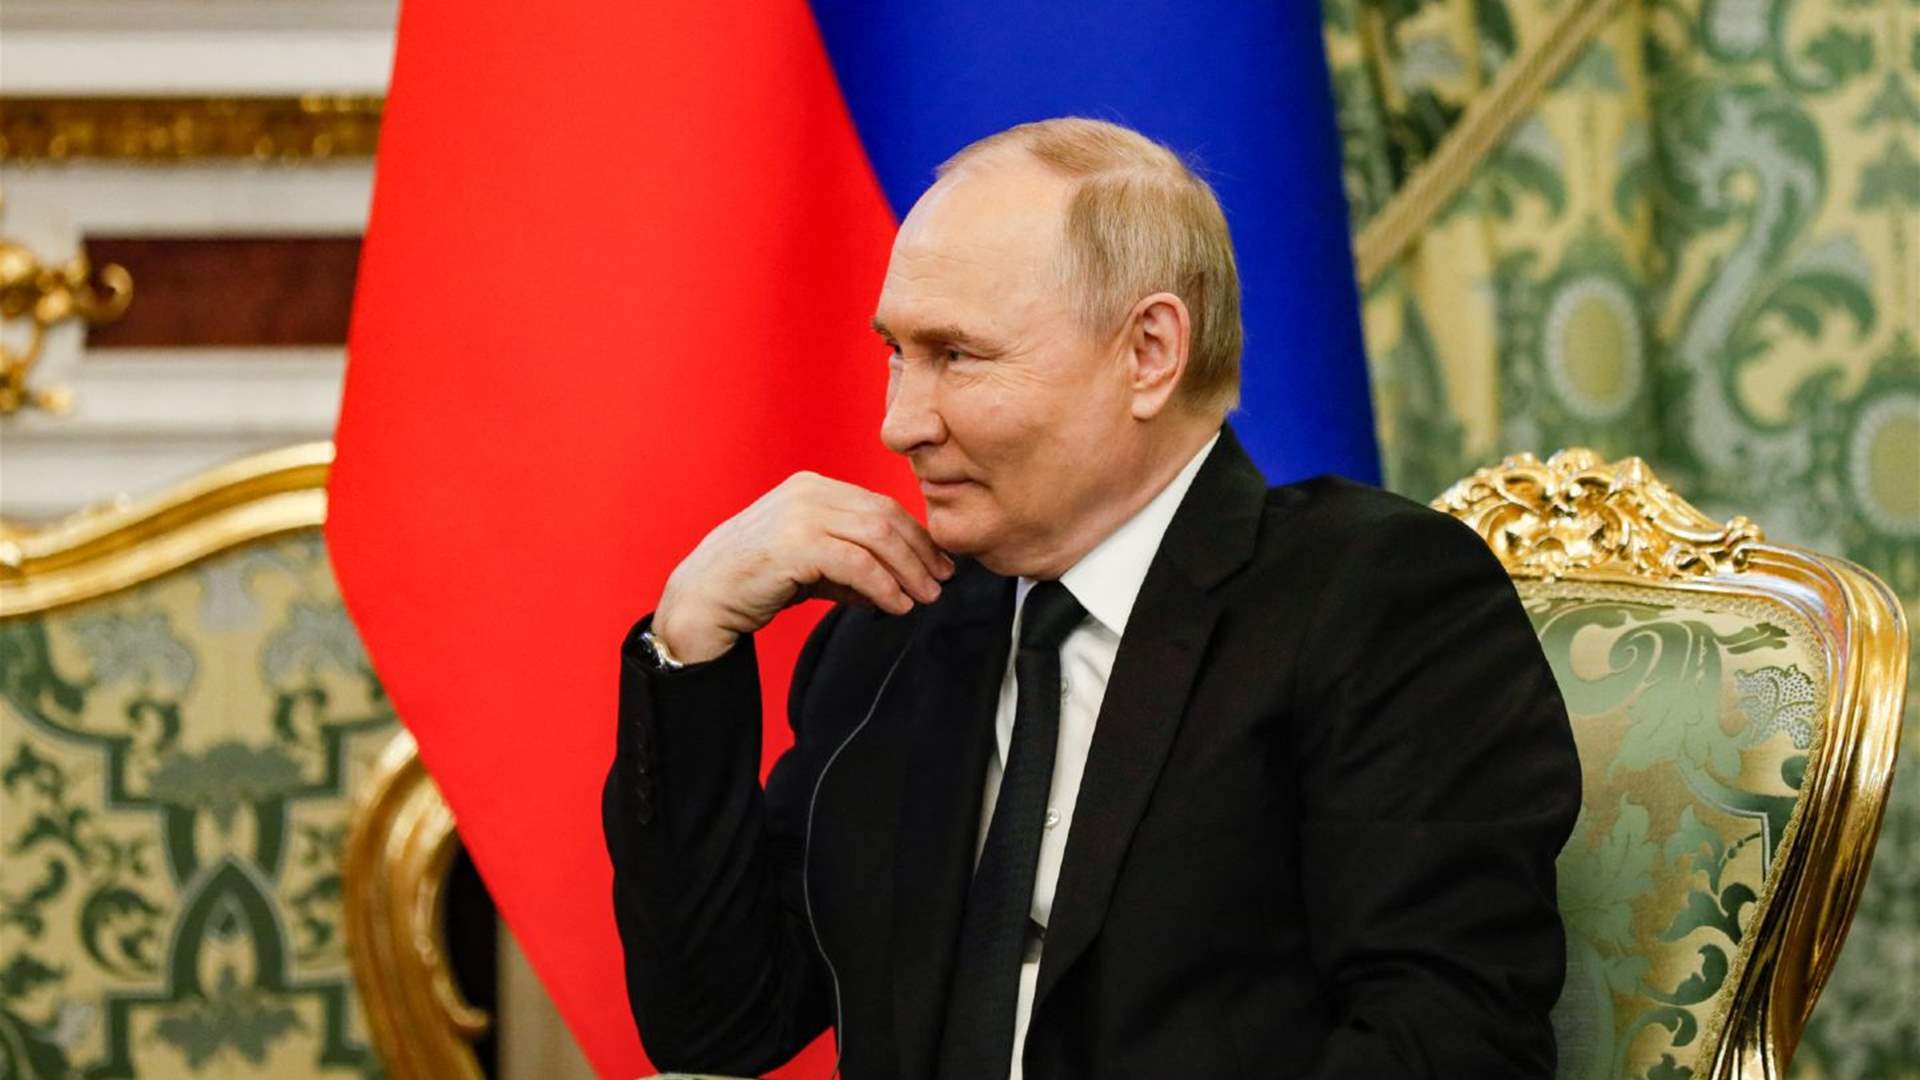 Putin: Russia has no &quot;imperial ambitions&quot; and does not plan to attack NATO